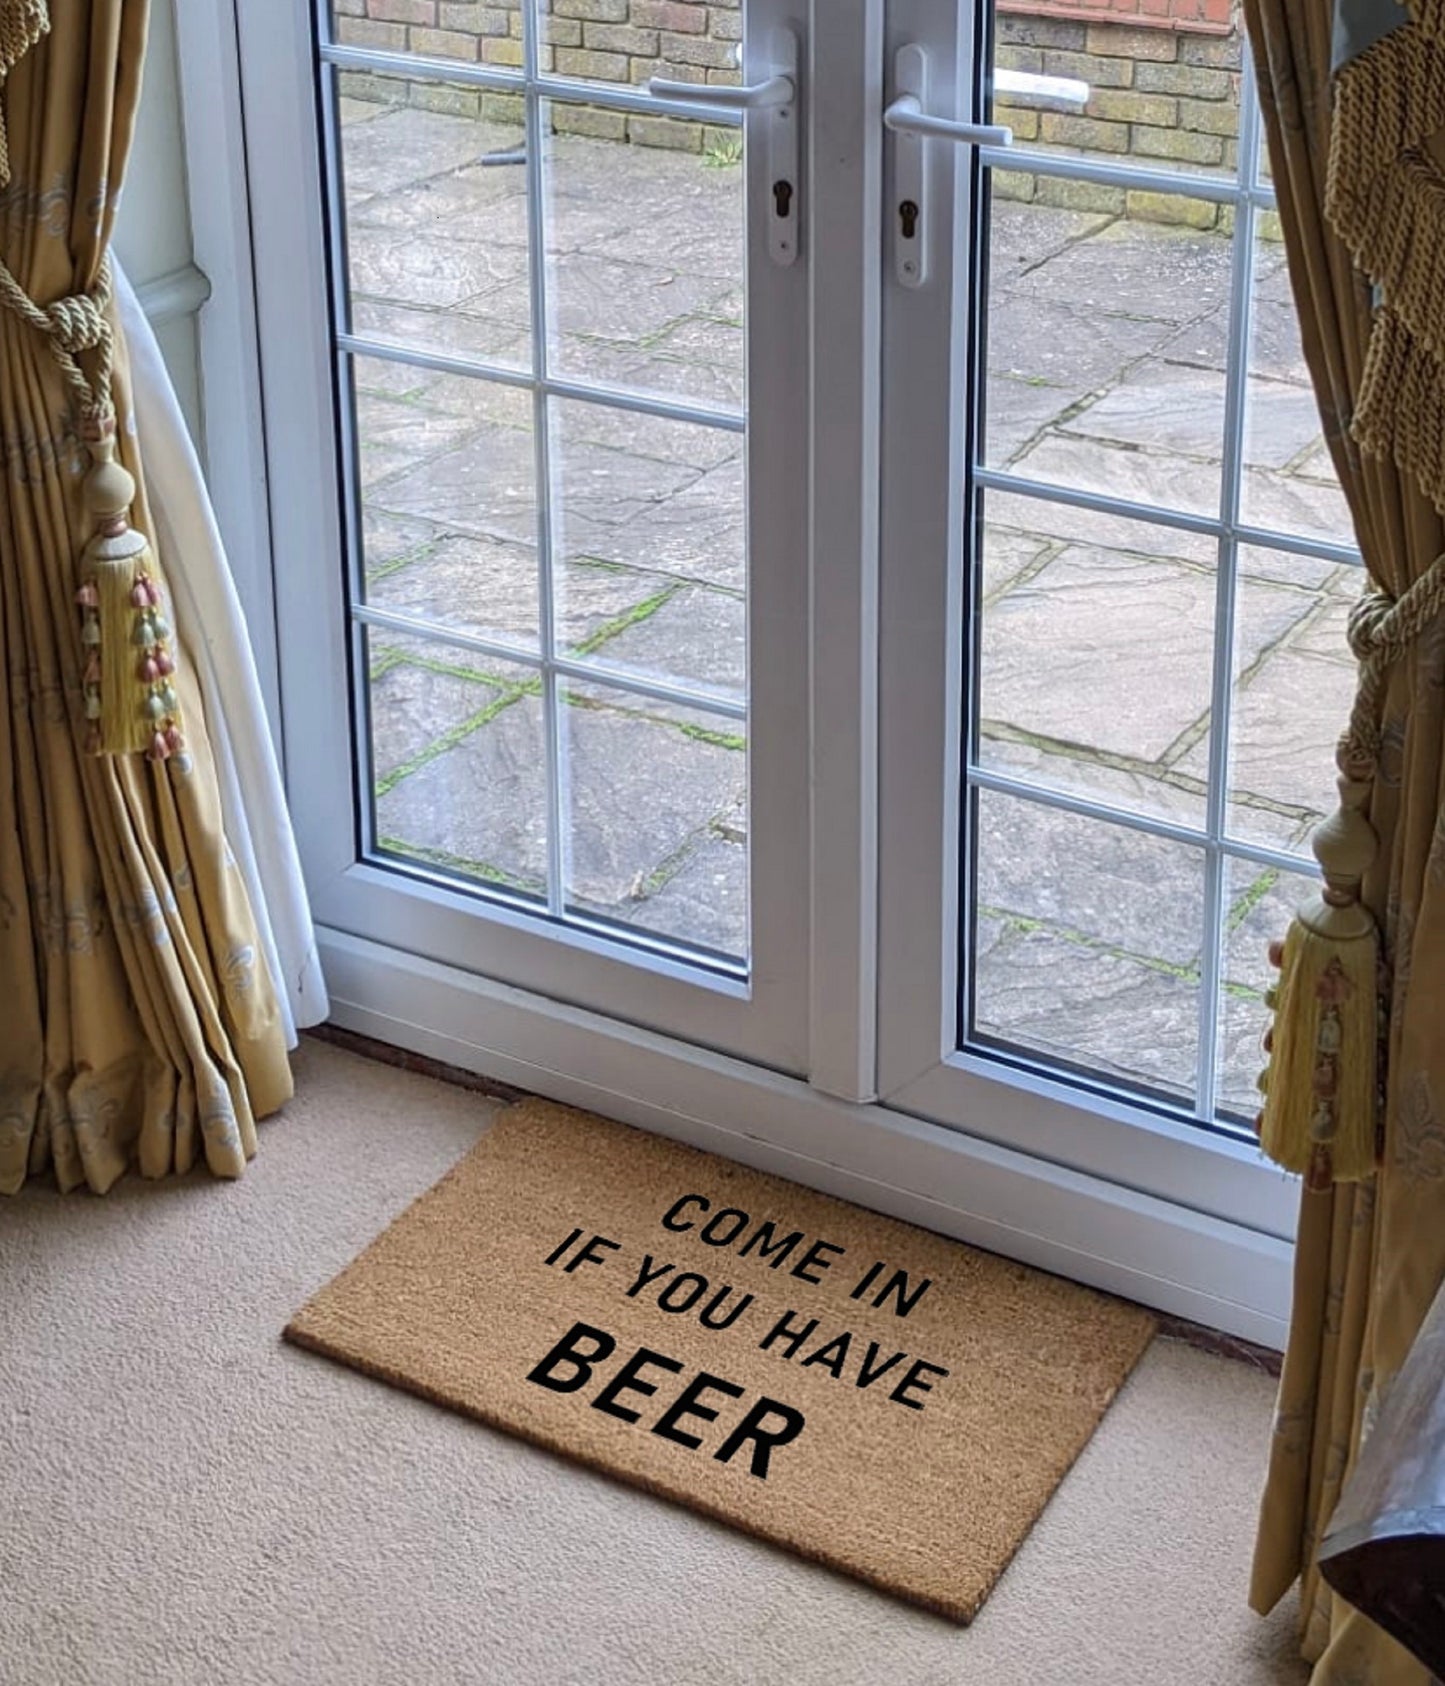 Come In If You Have Beer